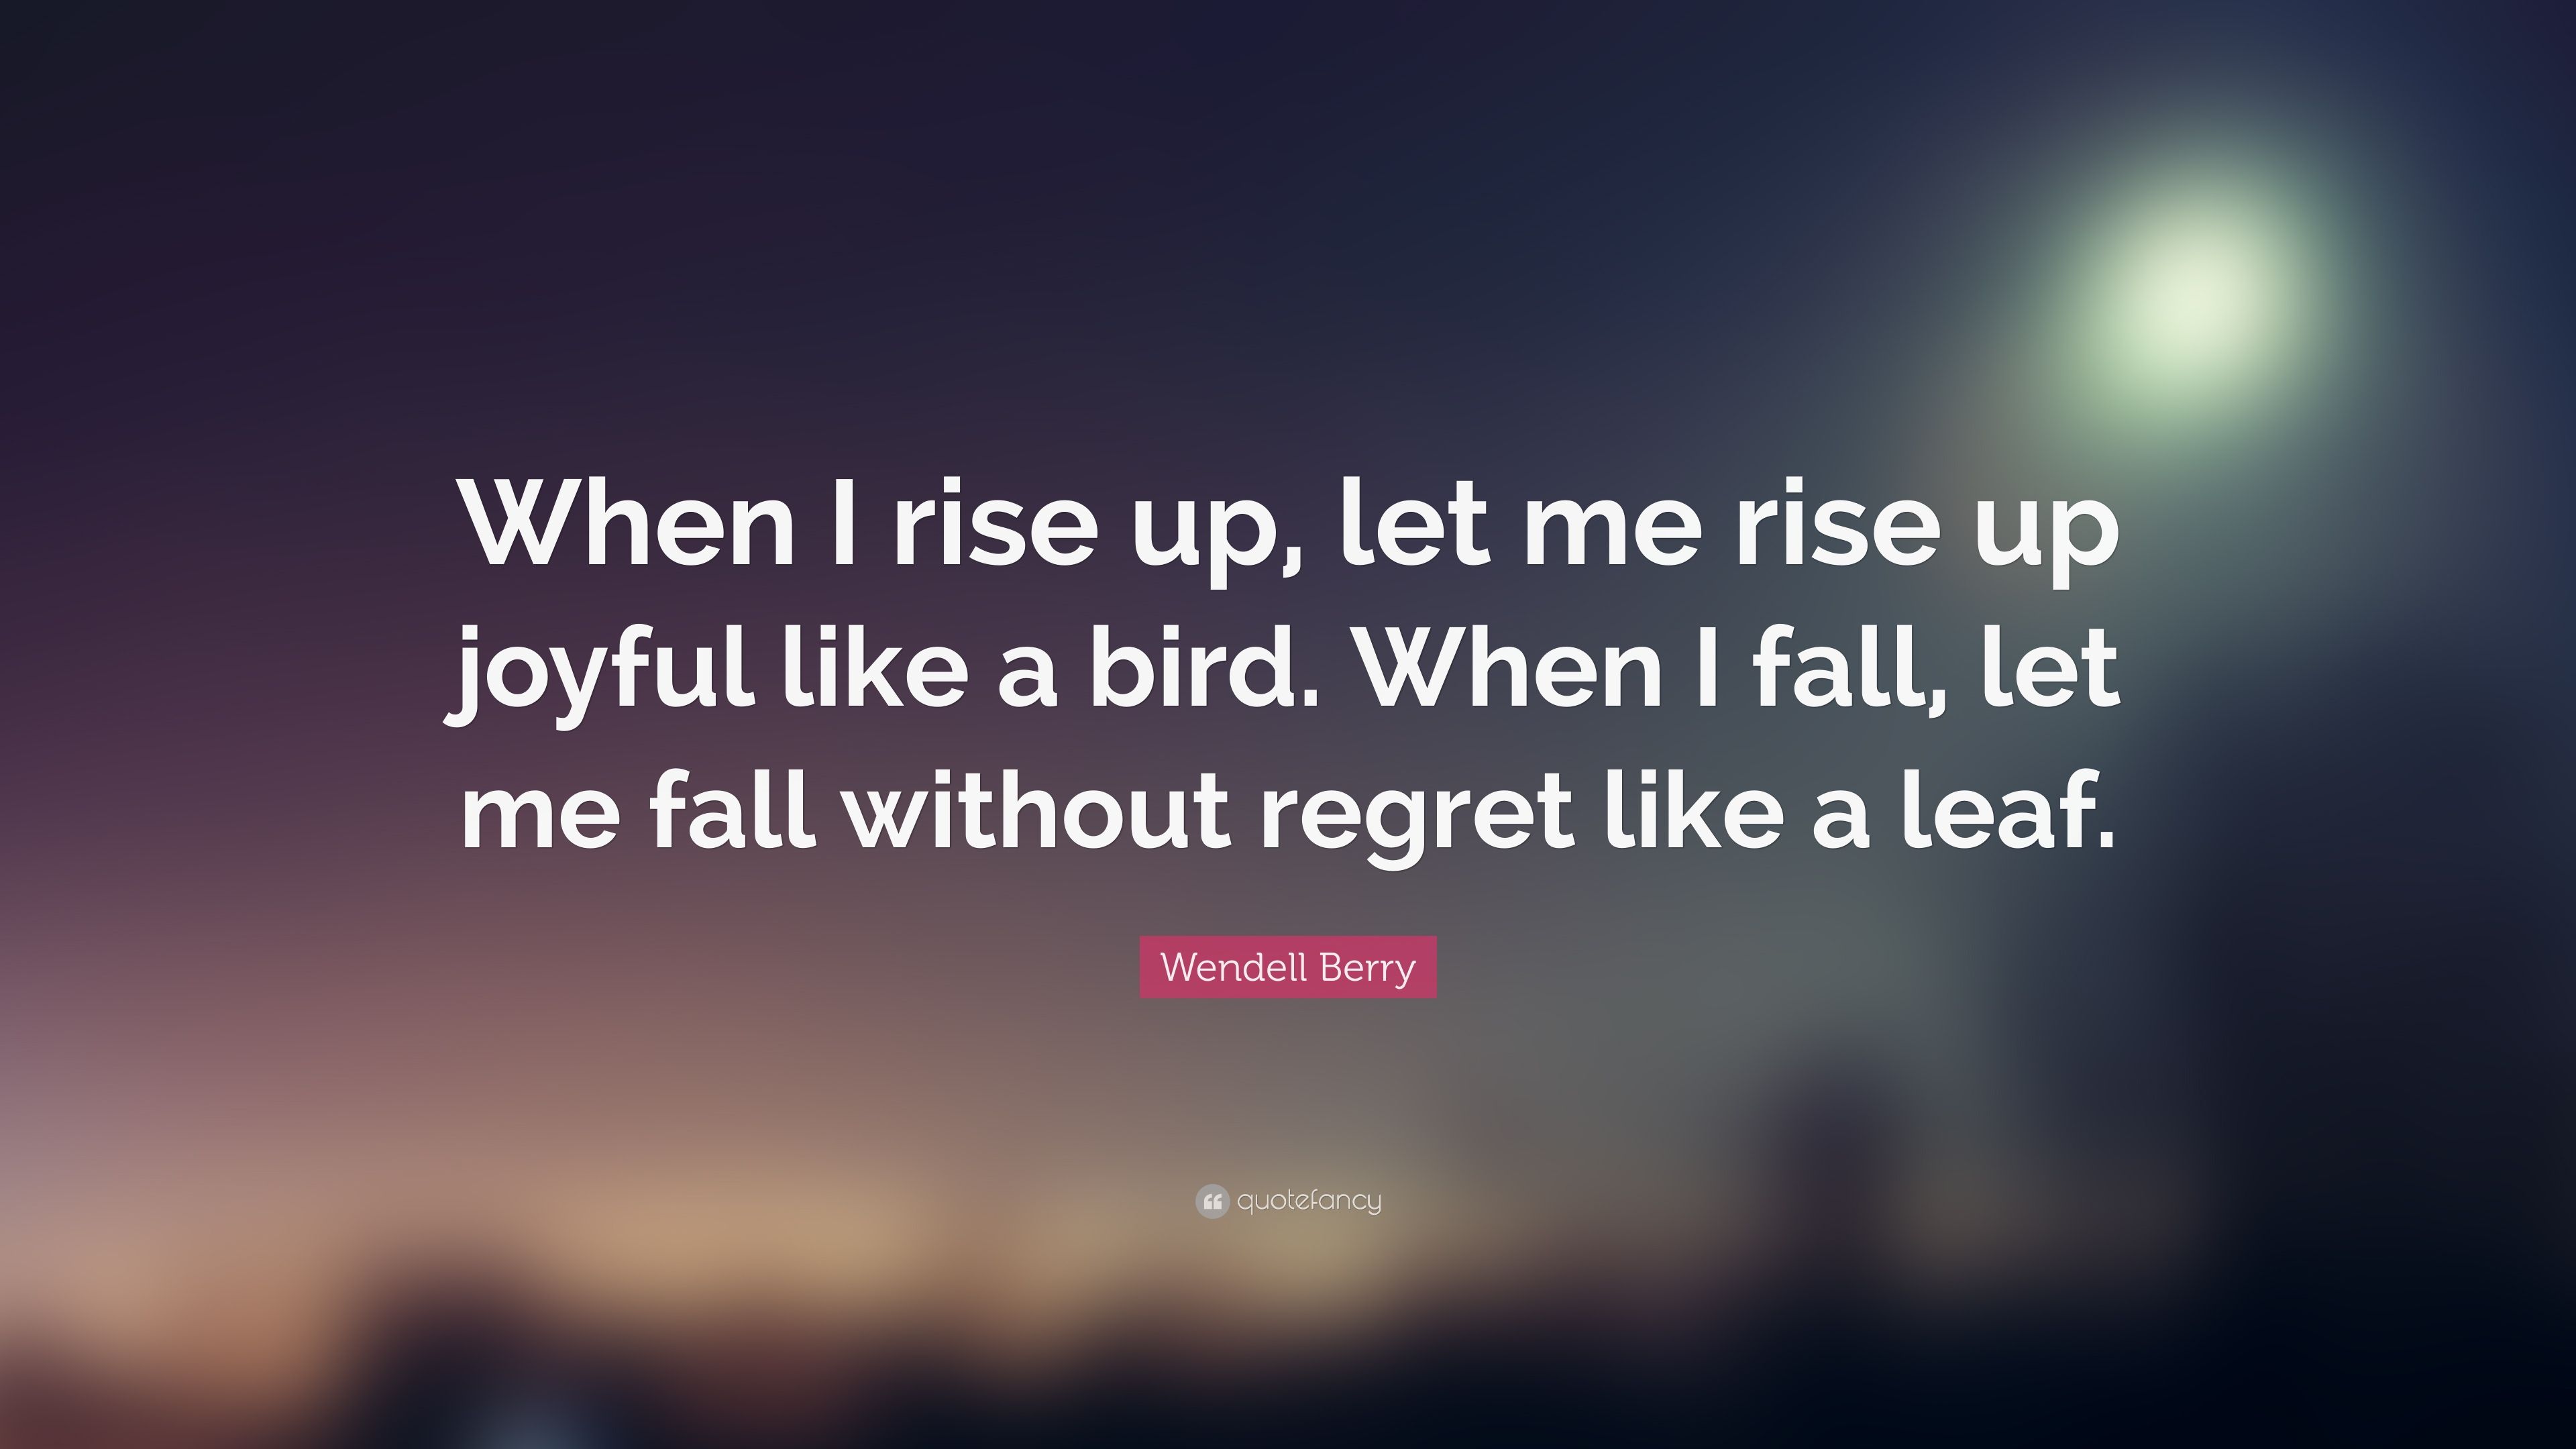 Wendell Berry Quote: “When I rise up, let me rise up joyful like a bird. When I fall, let me fall without regret like a leaf.” (12 wallpaper)